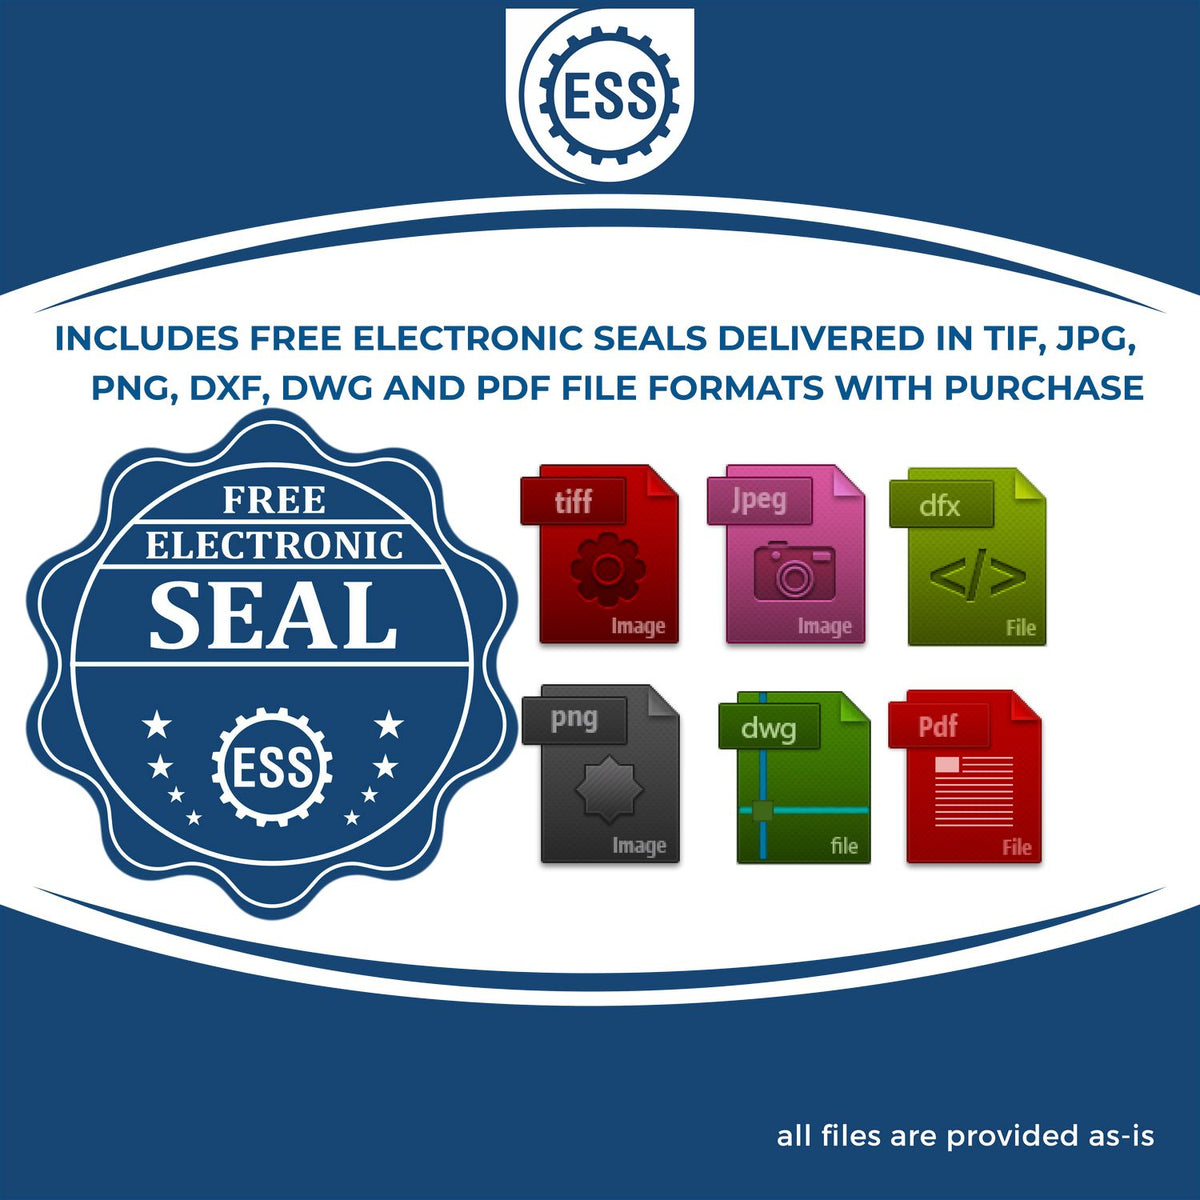 An infographic for the free electronic seal for the Premium MaxLight Pre-Inked South Carolina Landscape Architectural Stamp illustrating the different file type icons such as DXF, DWG, TIF, JPG and PNG.